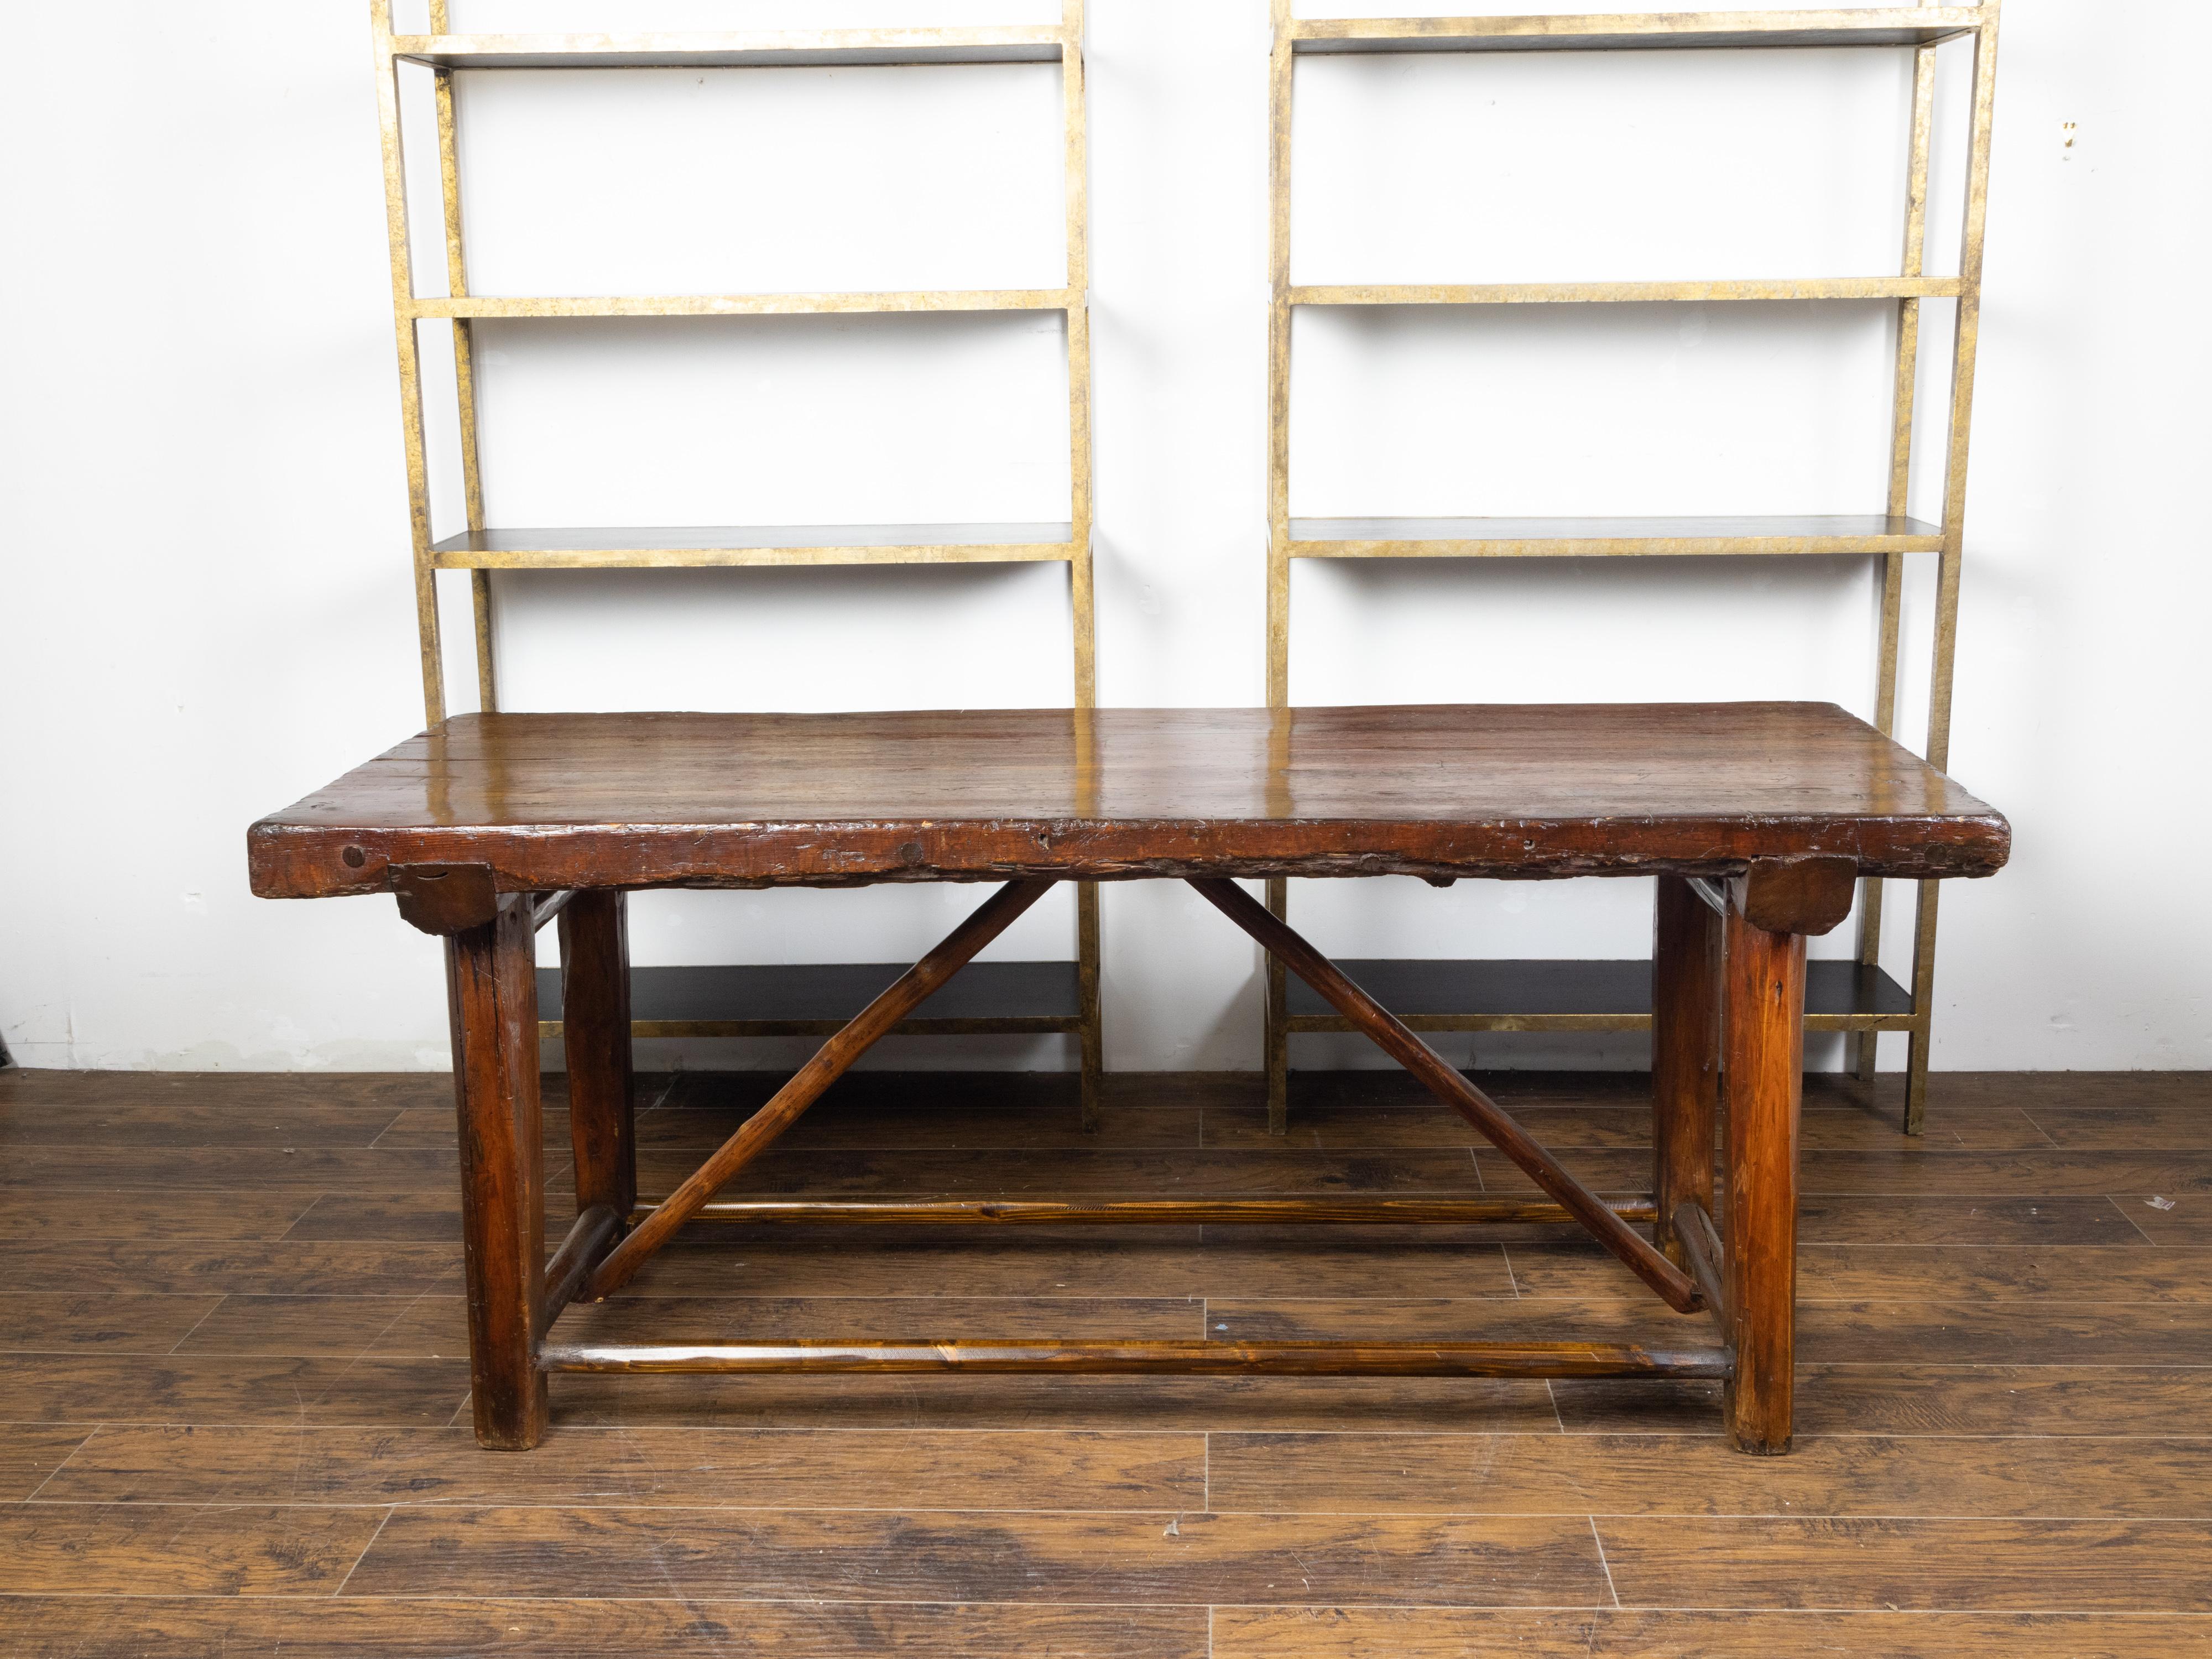 An American rustic pine log table from the early 20th century, with straight legs and side stretchers. Made in the USA during the early years of the 20th century, this pine log table features a rectangular planked top sitting above four straight